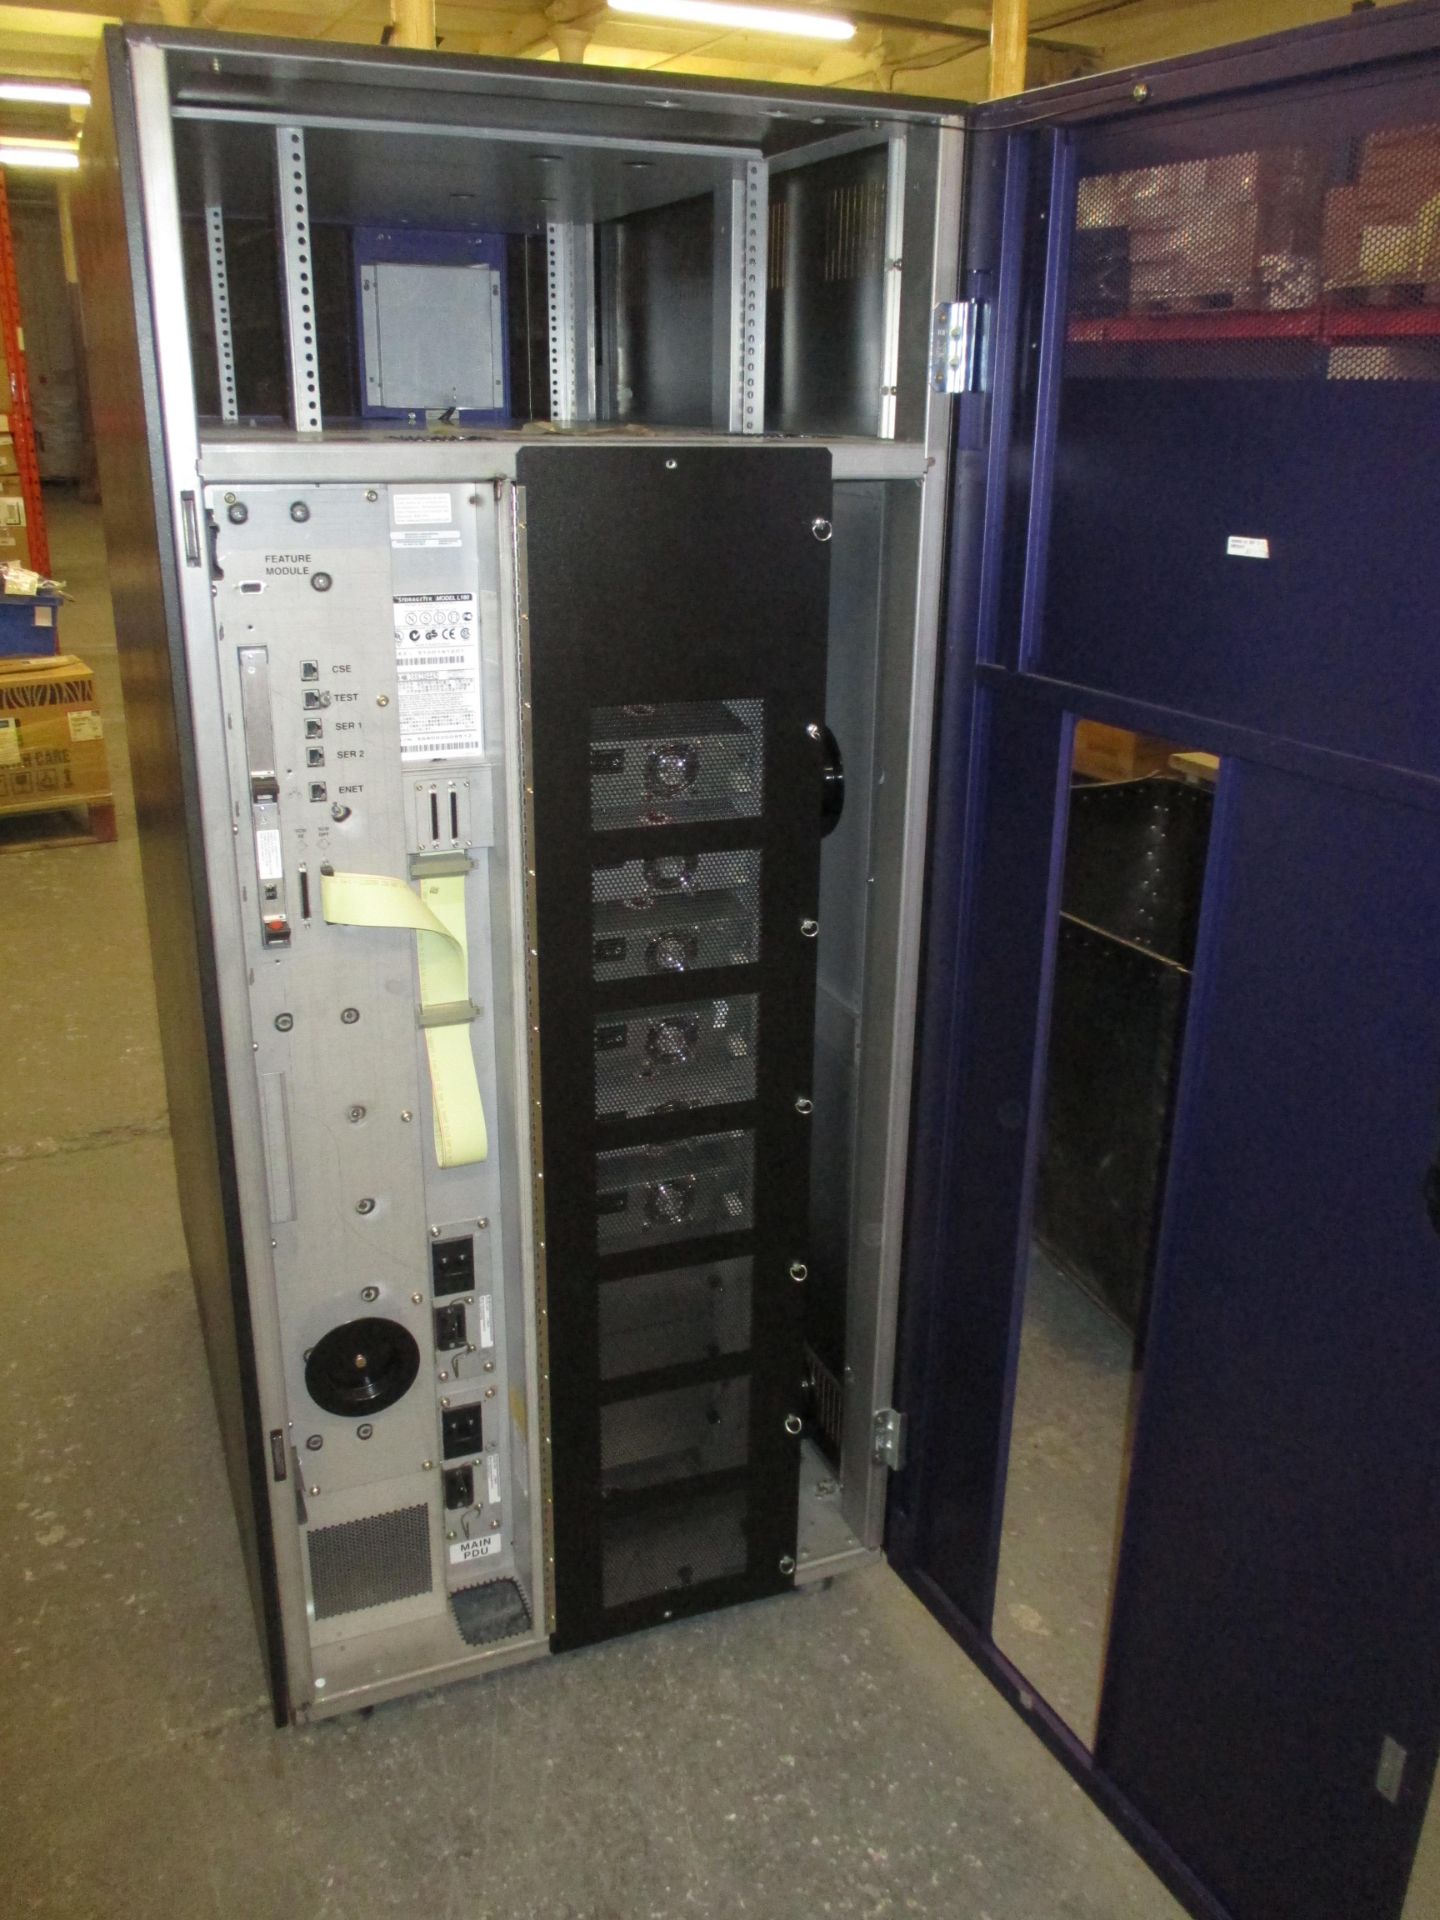 STORAGE TEK L180 TAPE LIBRARY CONTAINING 6 X 1BM LTO2-OO1 FIBER TAPE DRIVES. WITH KEY - Image 5 of 8